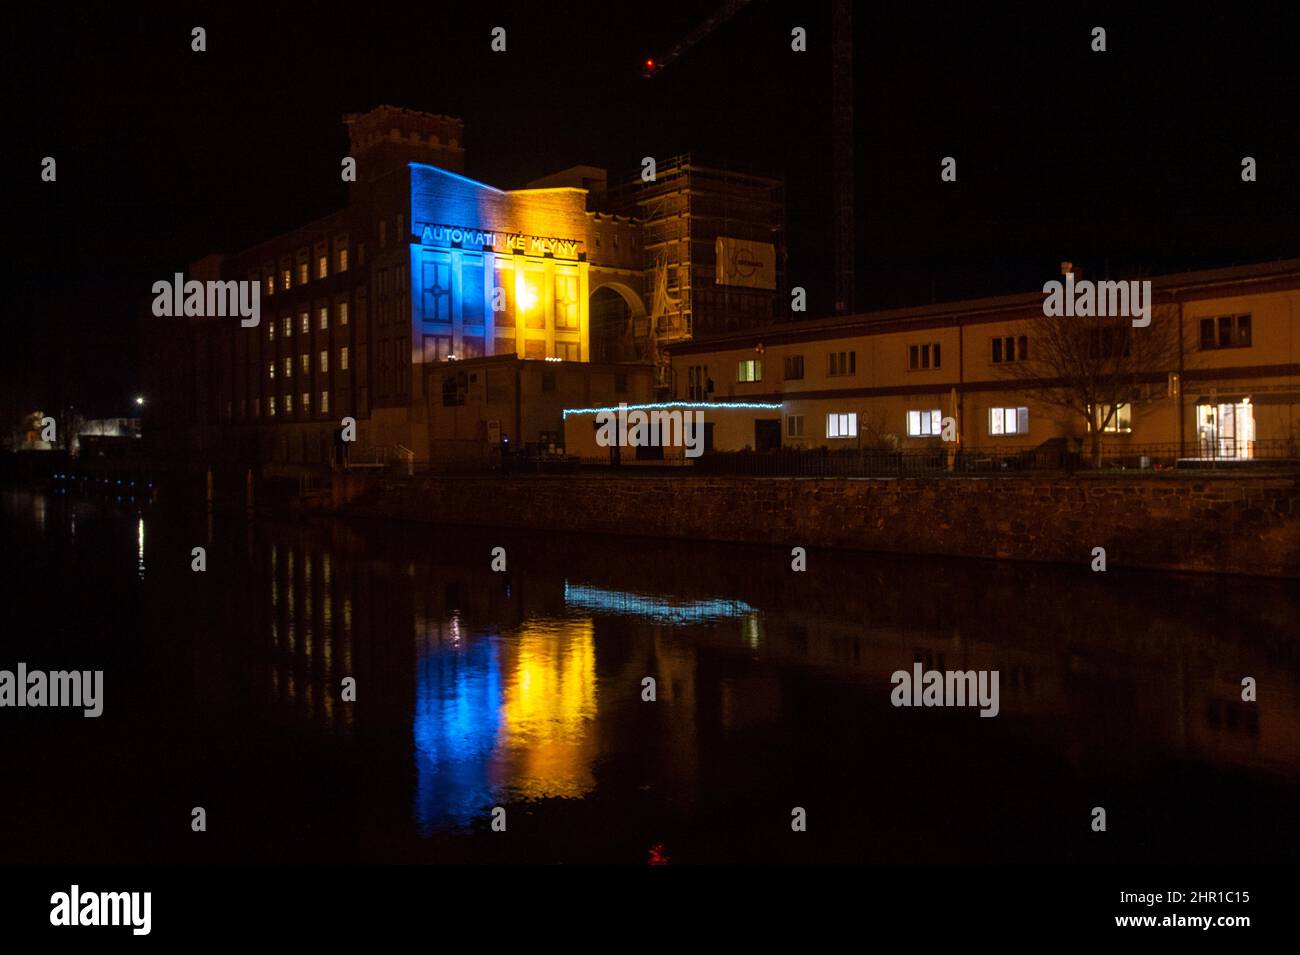 Pardubice, Czech Republic. 24th Feb, 2022. Technical monument the automatic mill in Pardubice, Czech Republic, is illuminated in Ukrainian colours to mark support in the conflict with Russia, Feb. 24, 2022. Credit: Josef Vostarek/CTK Photo/Alamy Live News Stock Photo